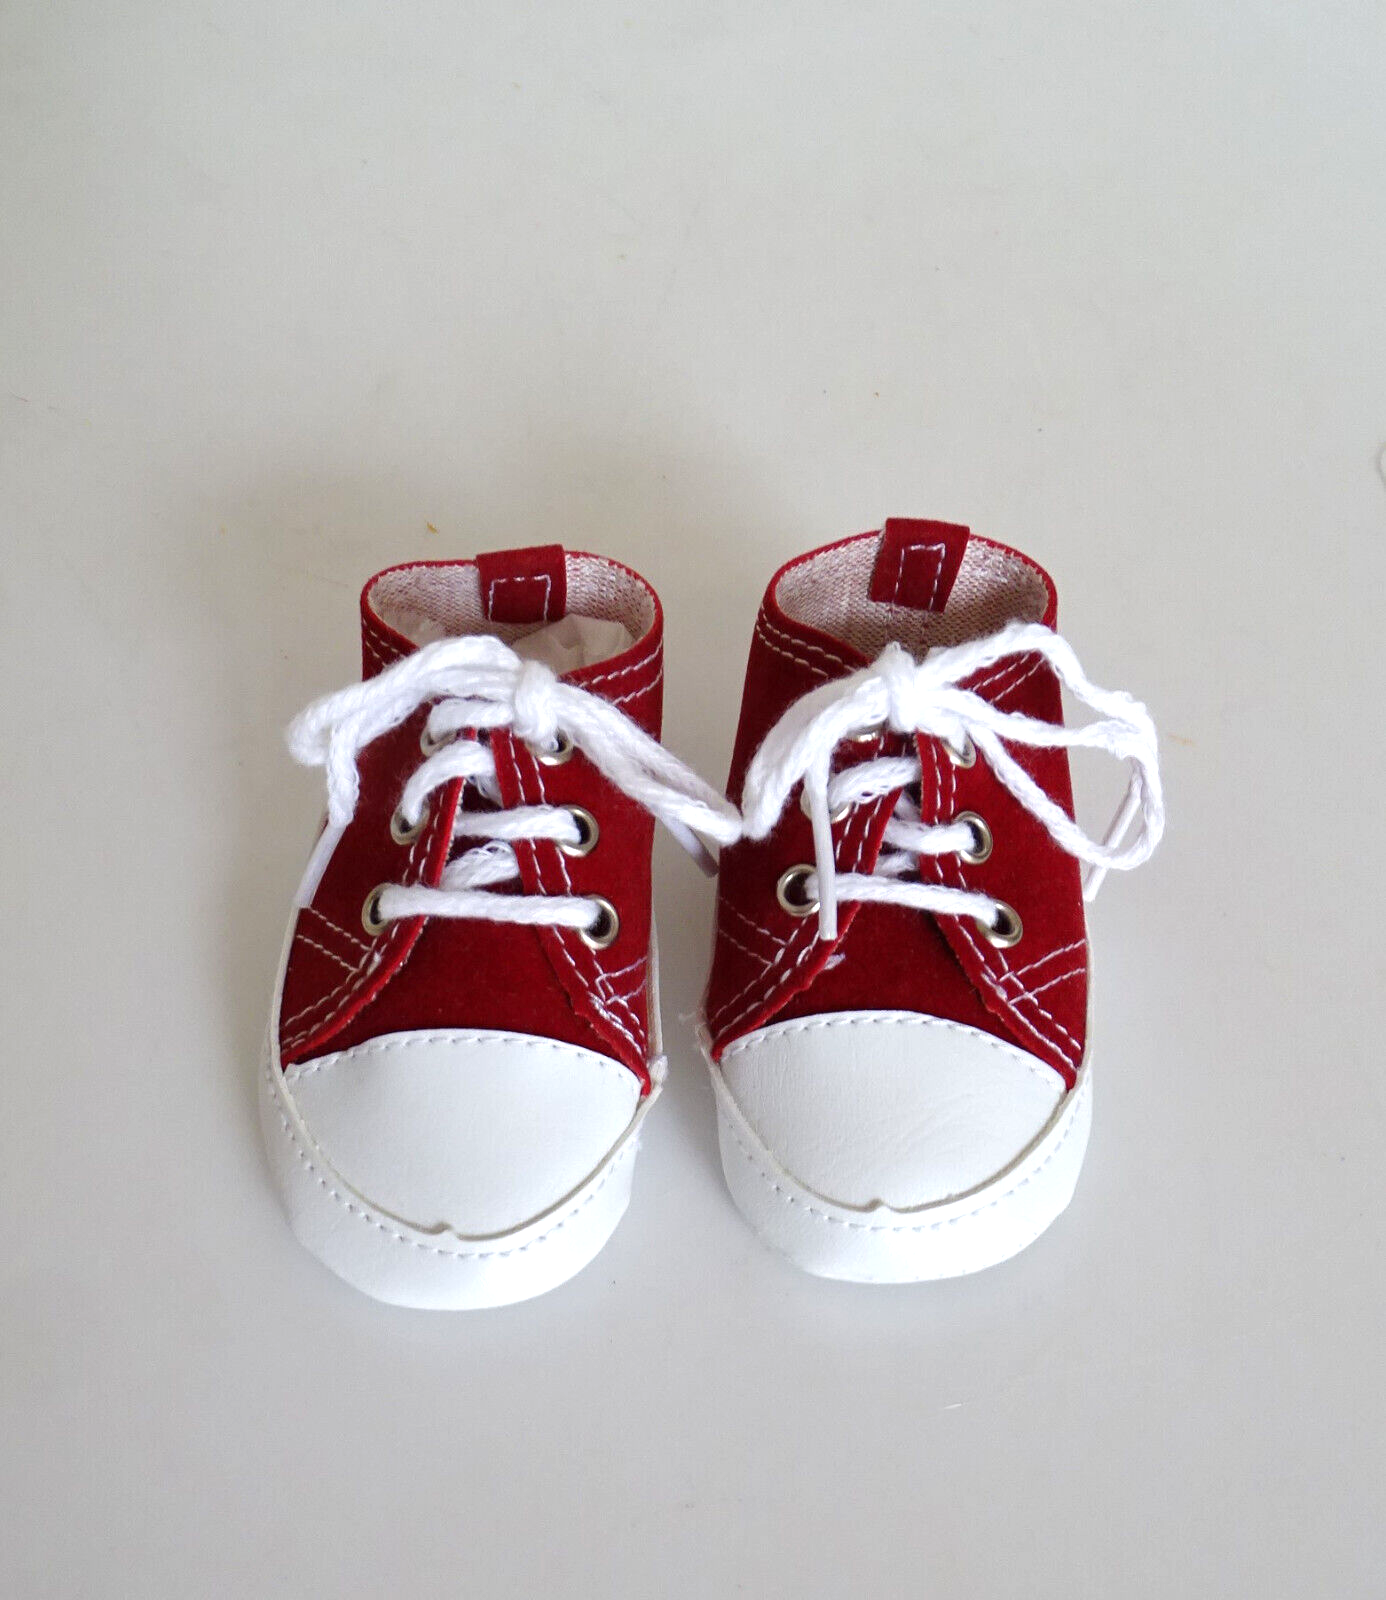 Primary image for Modern Red & White Sneakers 3.25" for Medium Size Doll